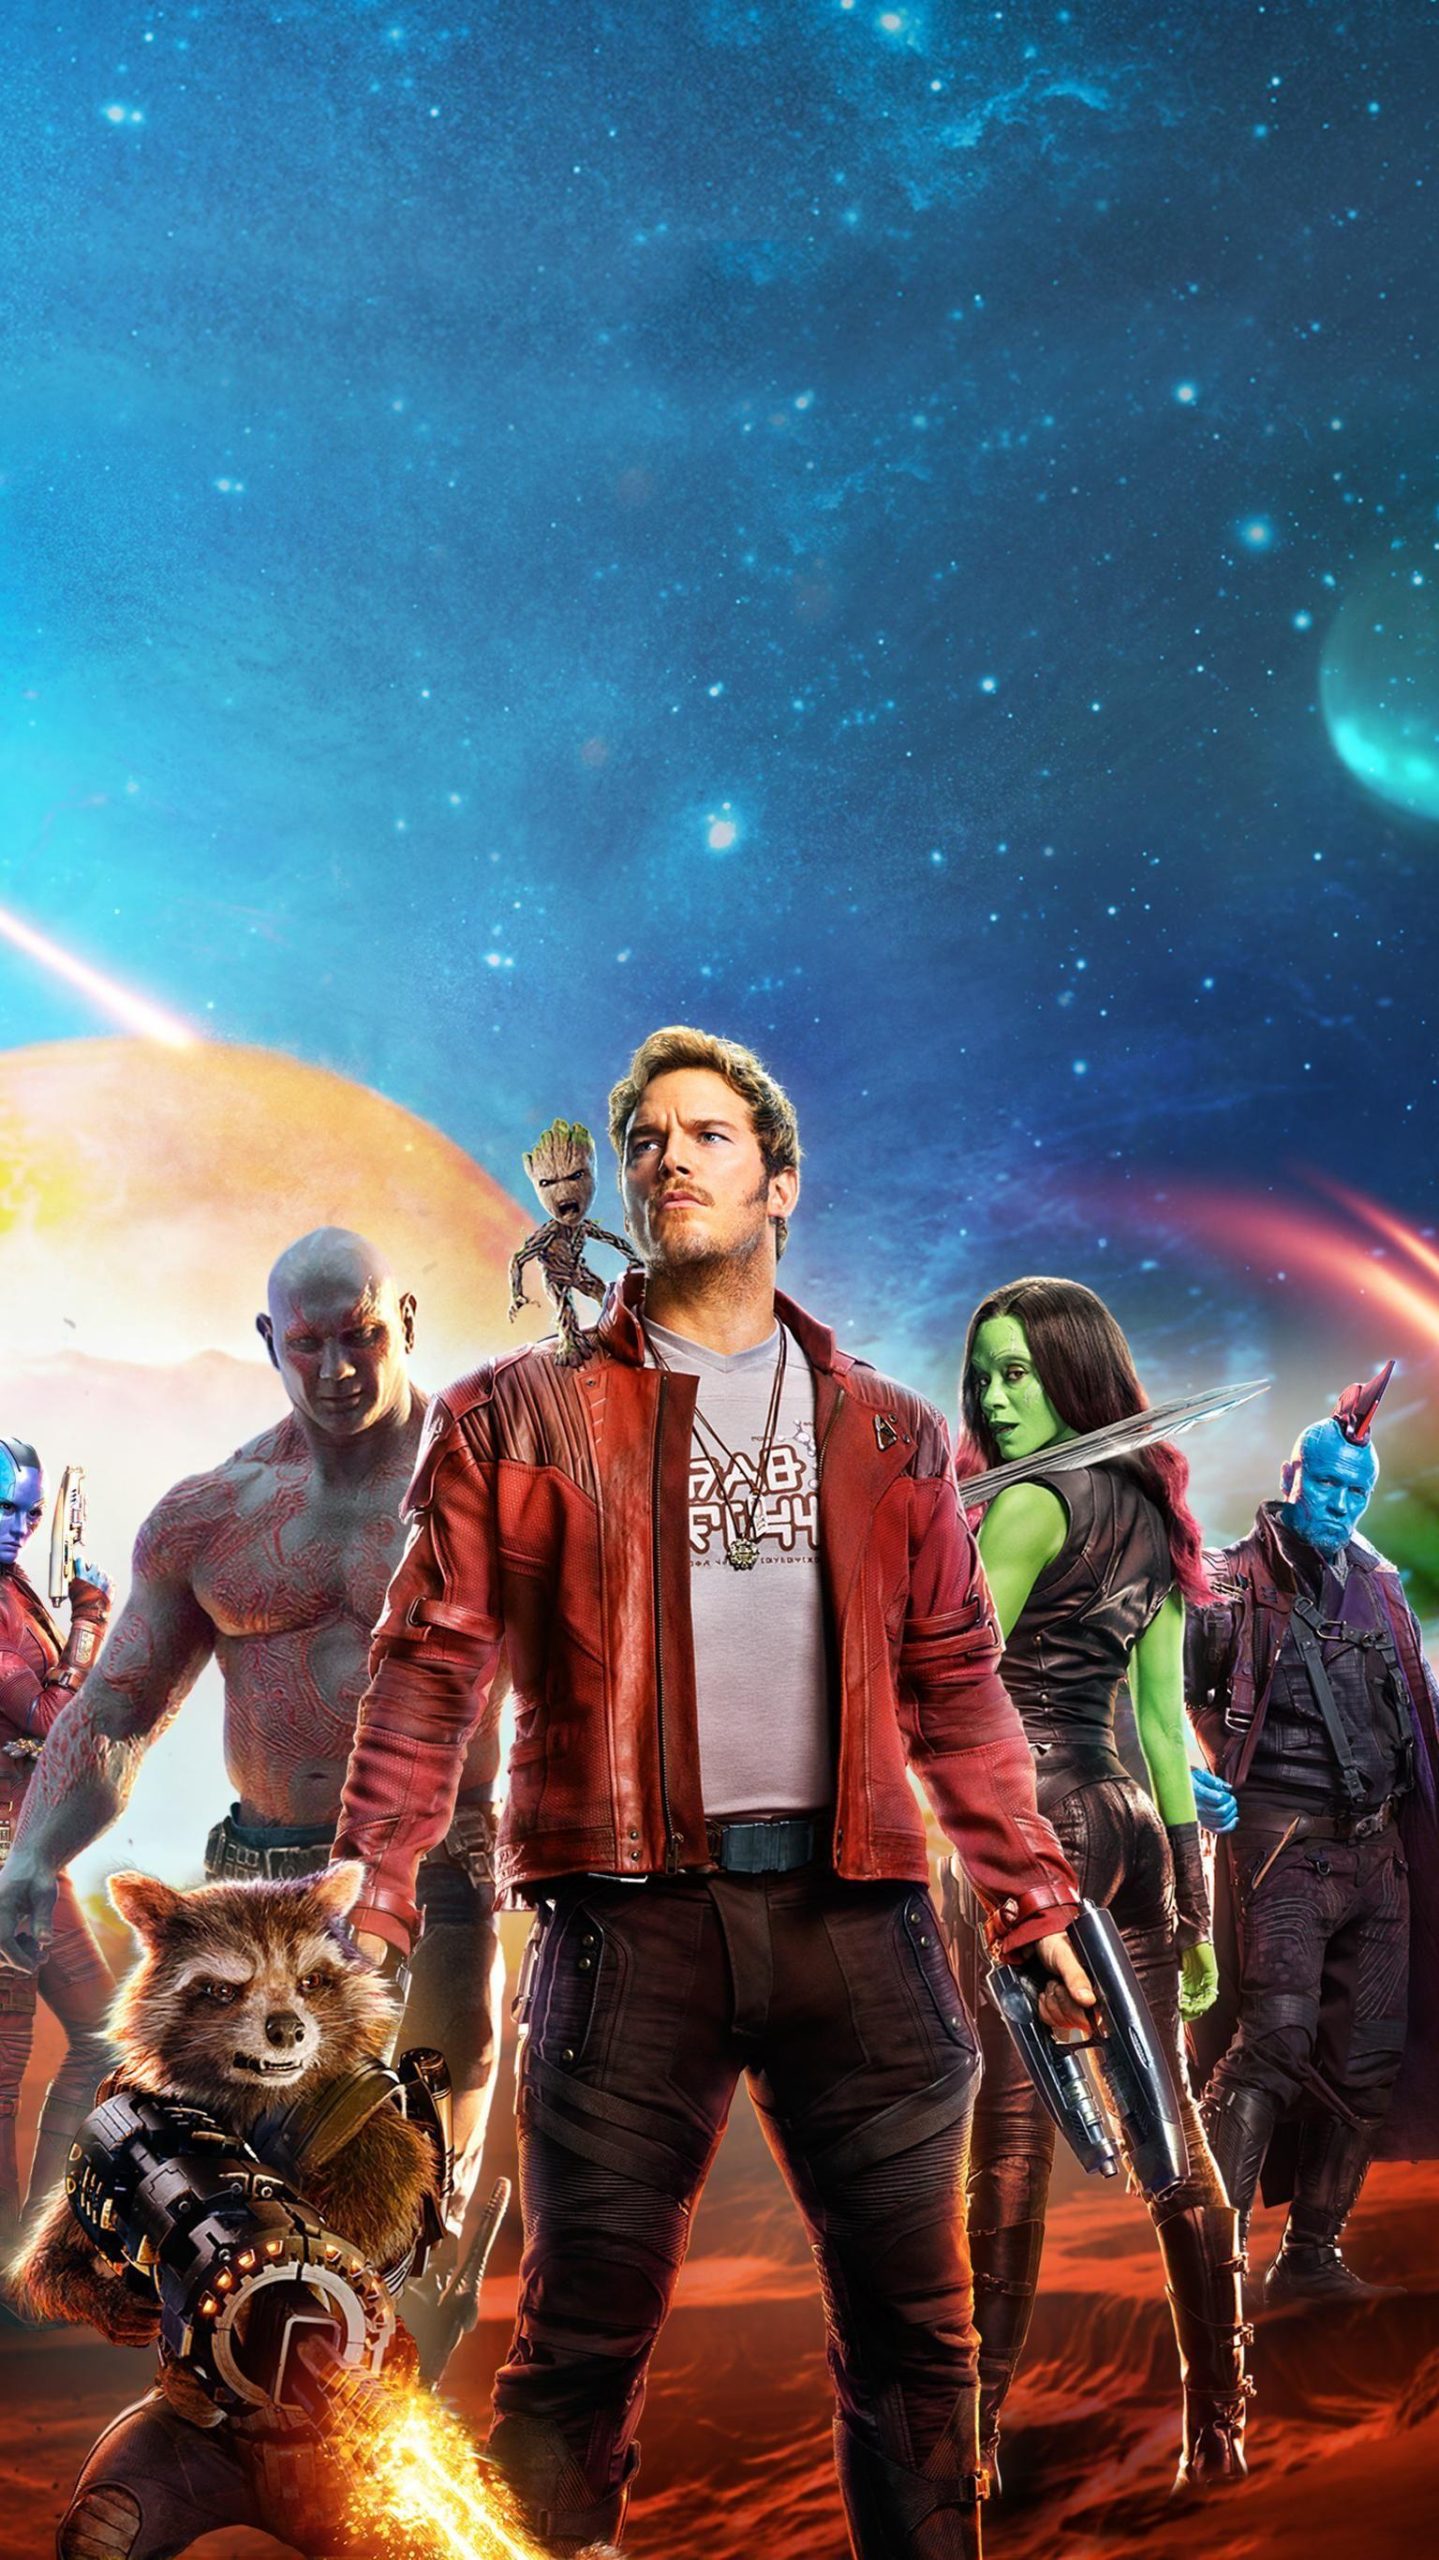 Guardians Of The Galaxy Character Posters Wallpaper For Ipad, Guardians Of The Galaxy Character Posters, Movies